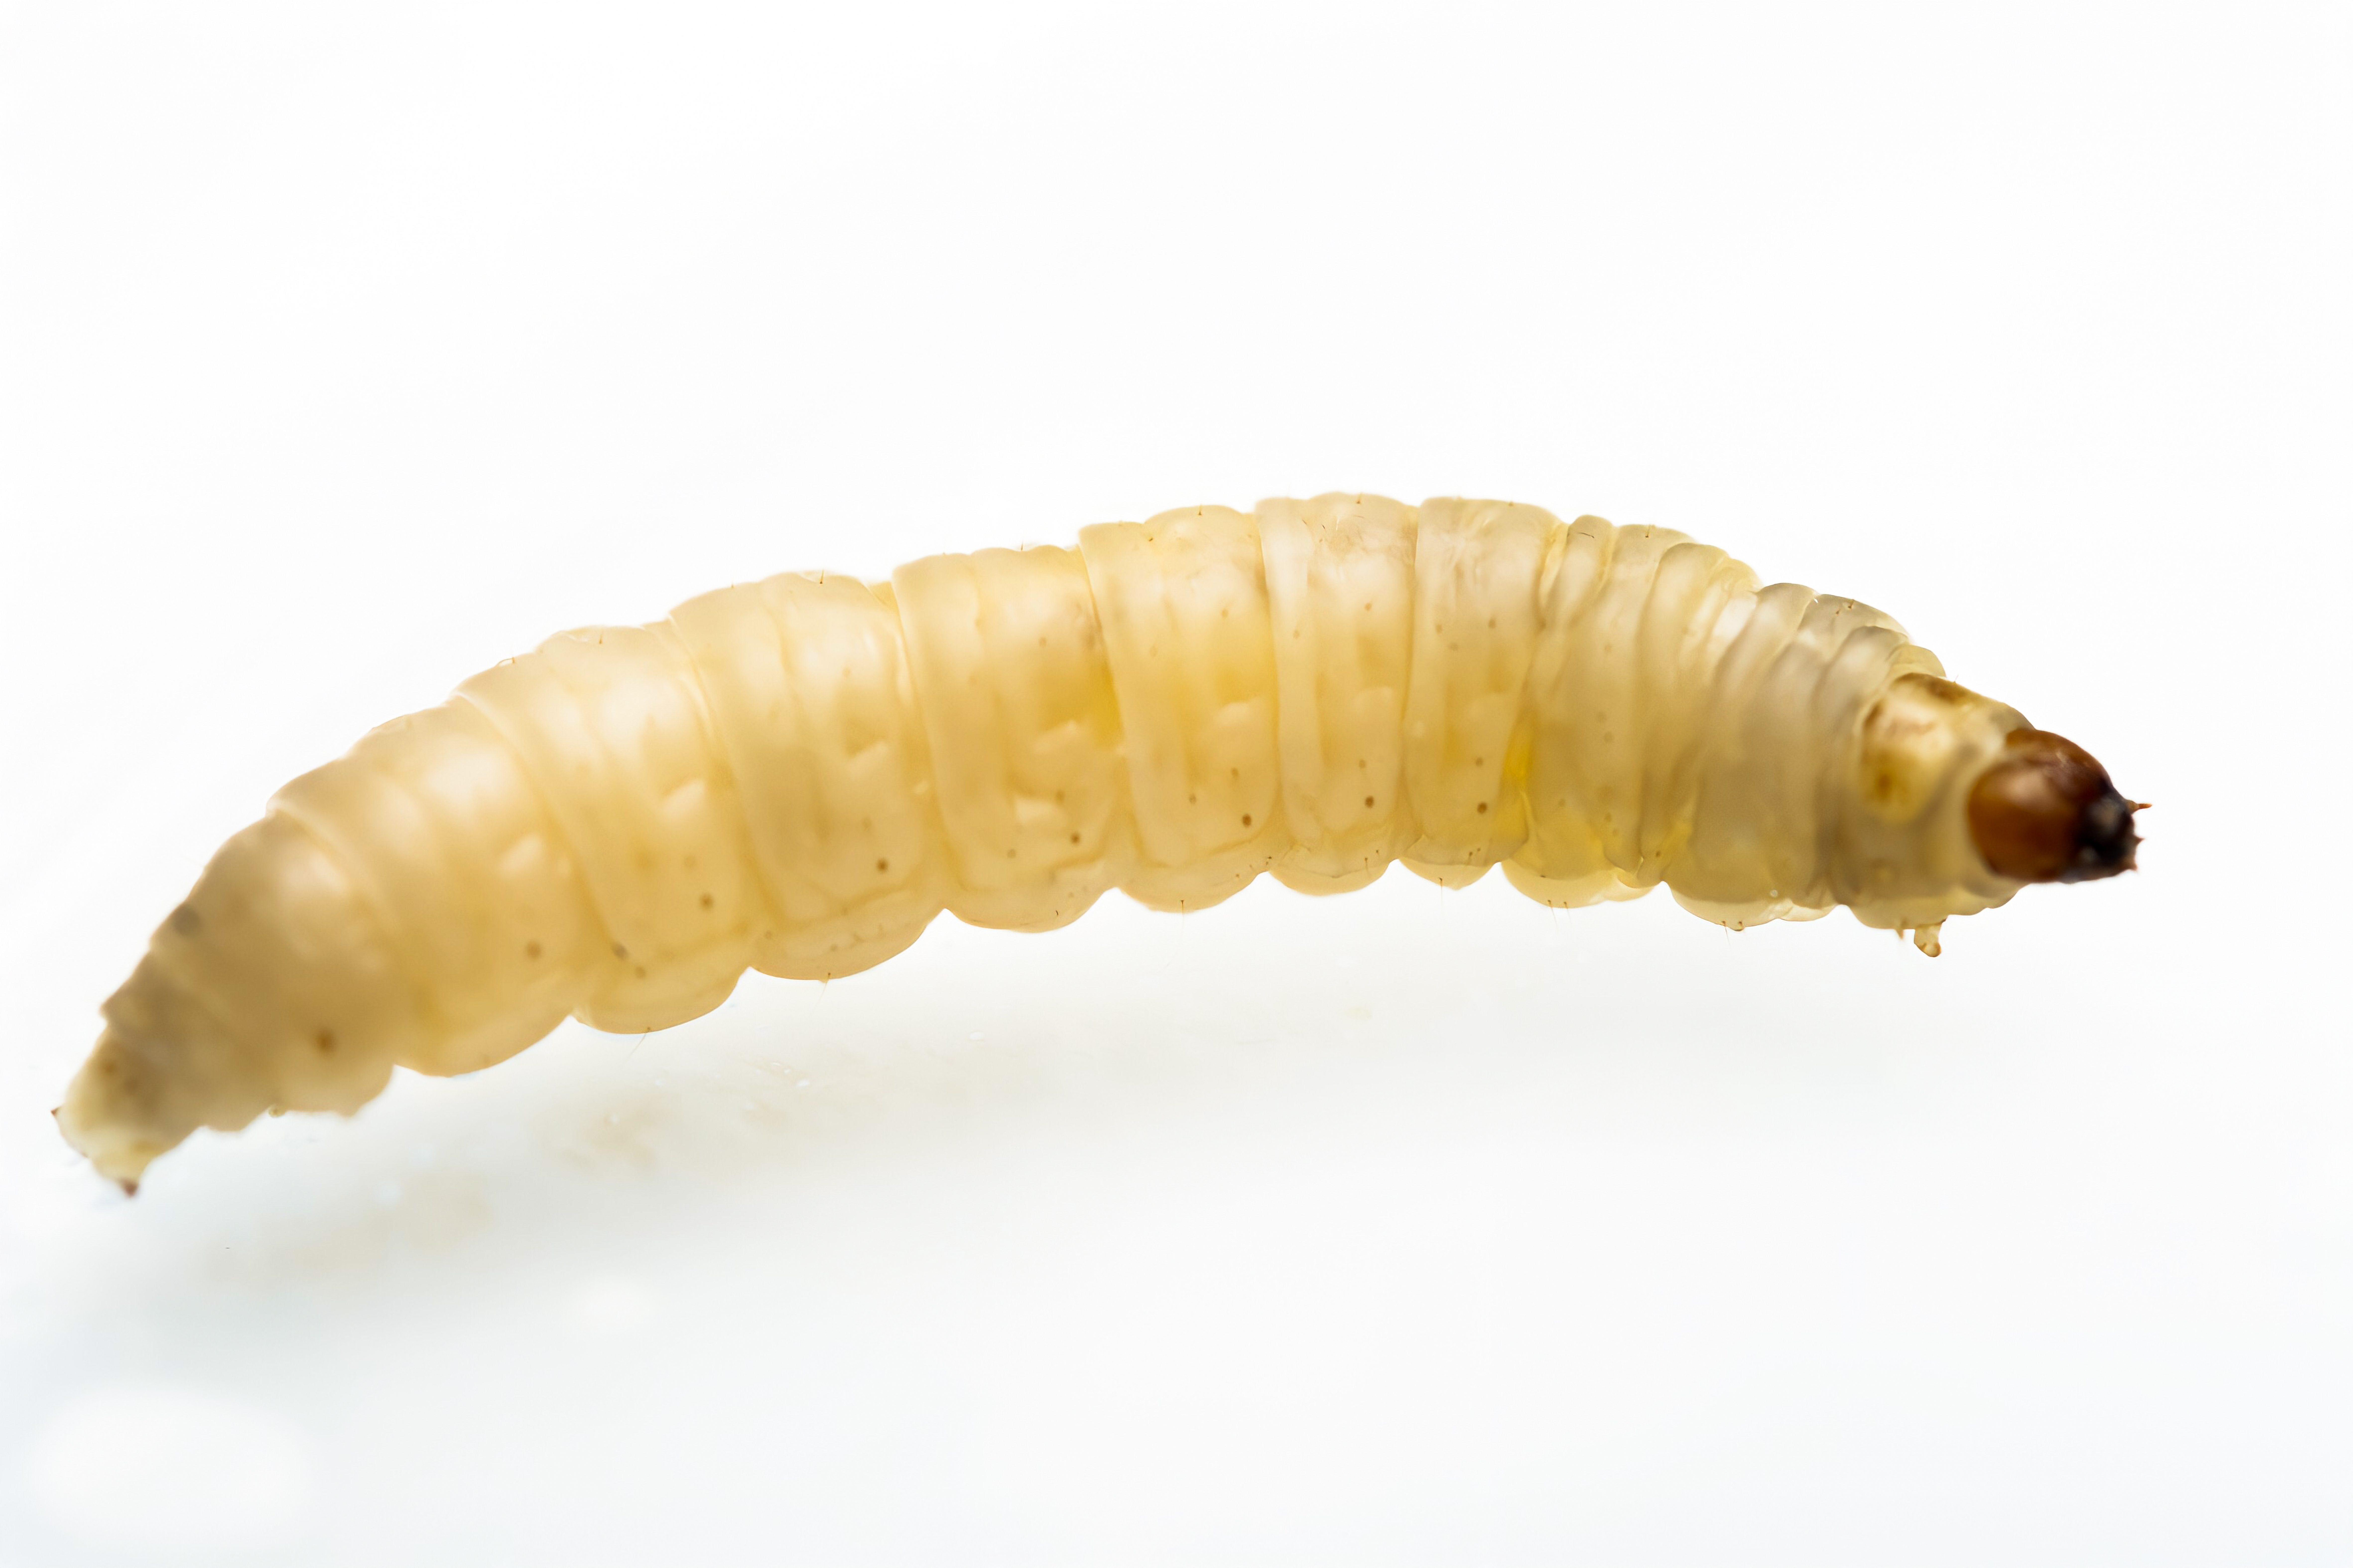 Wax Worms – Bugs for Growers